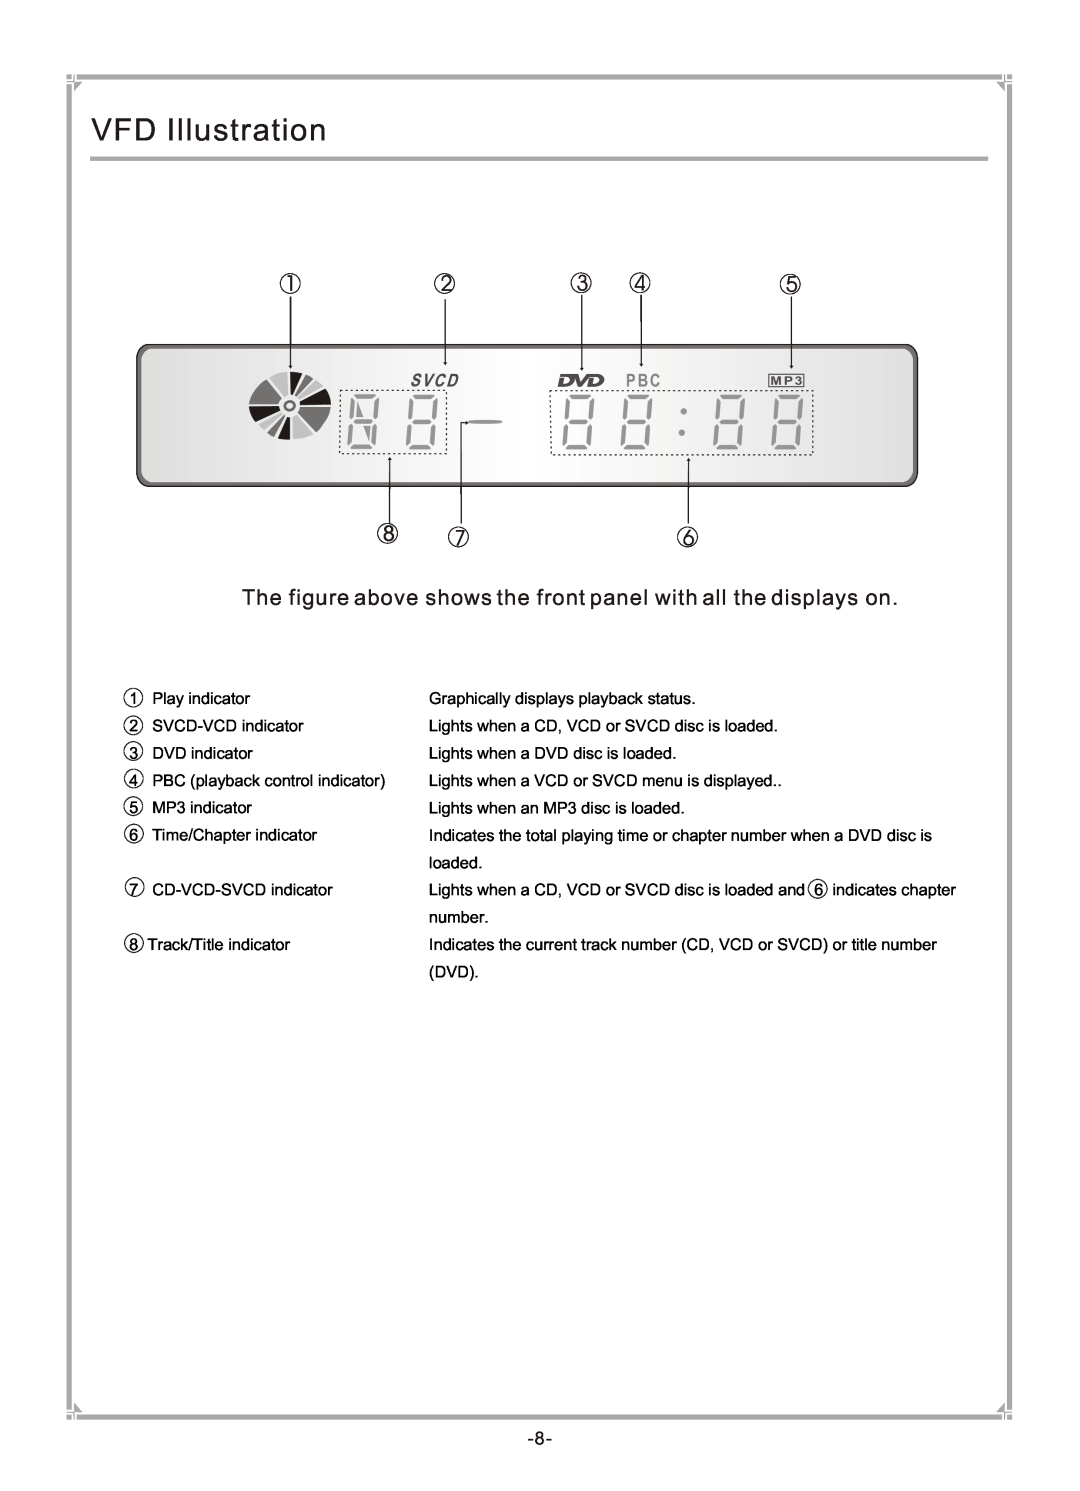 GoVideo DVP745 user manual VFD Illustration, The figure above shows the front panel with all the displays on 